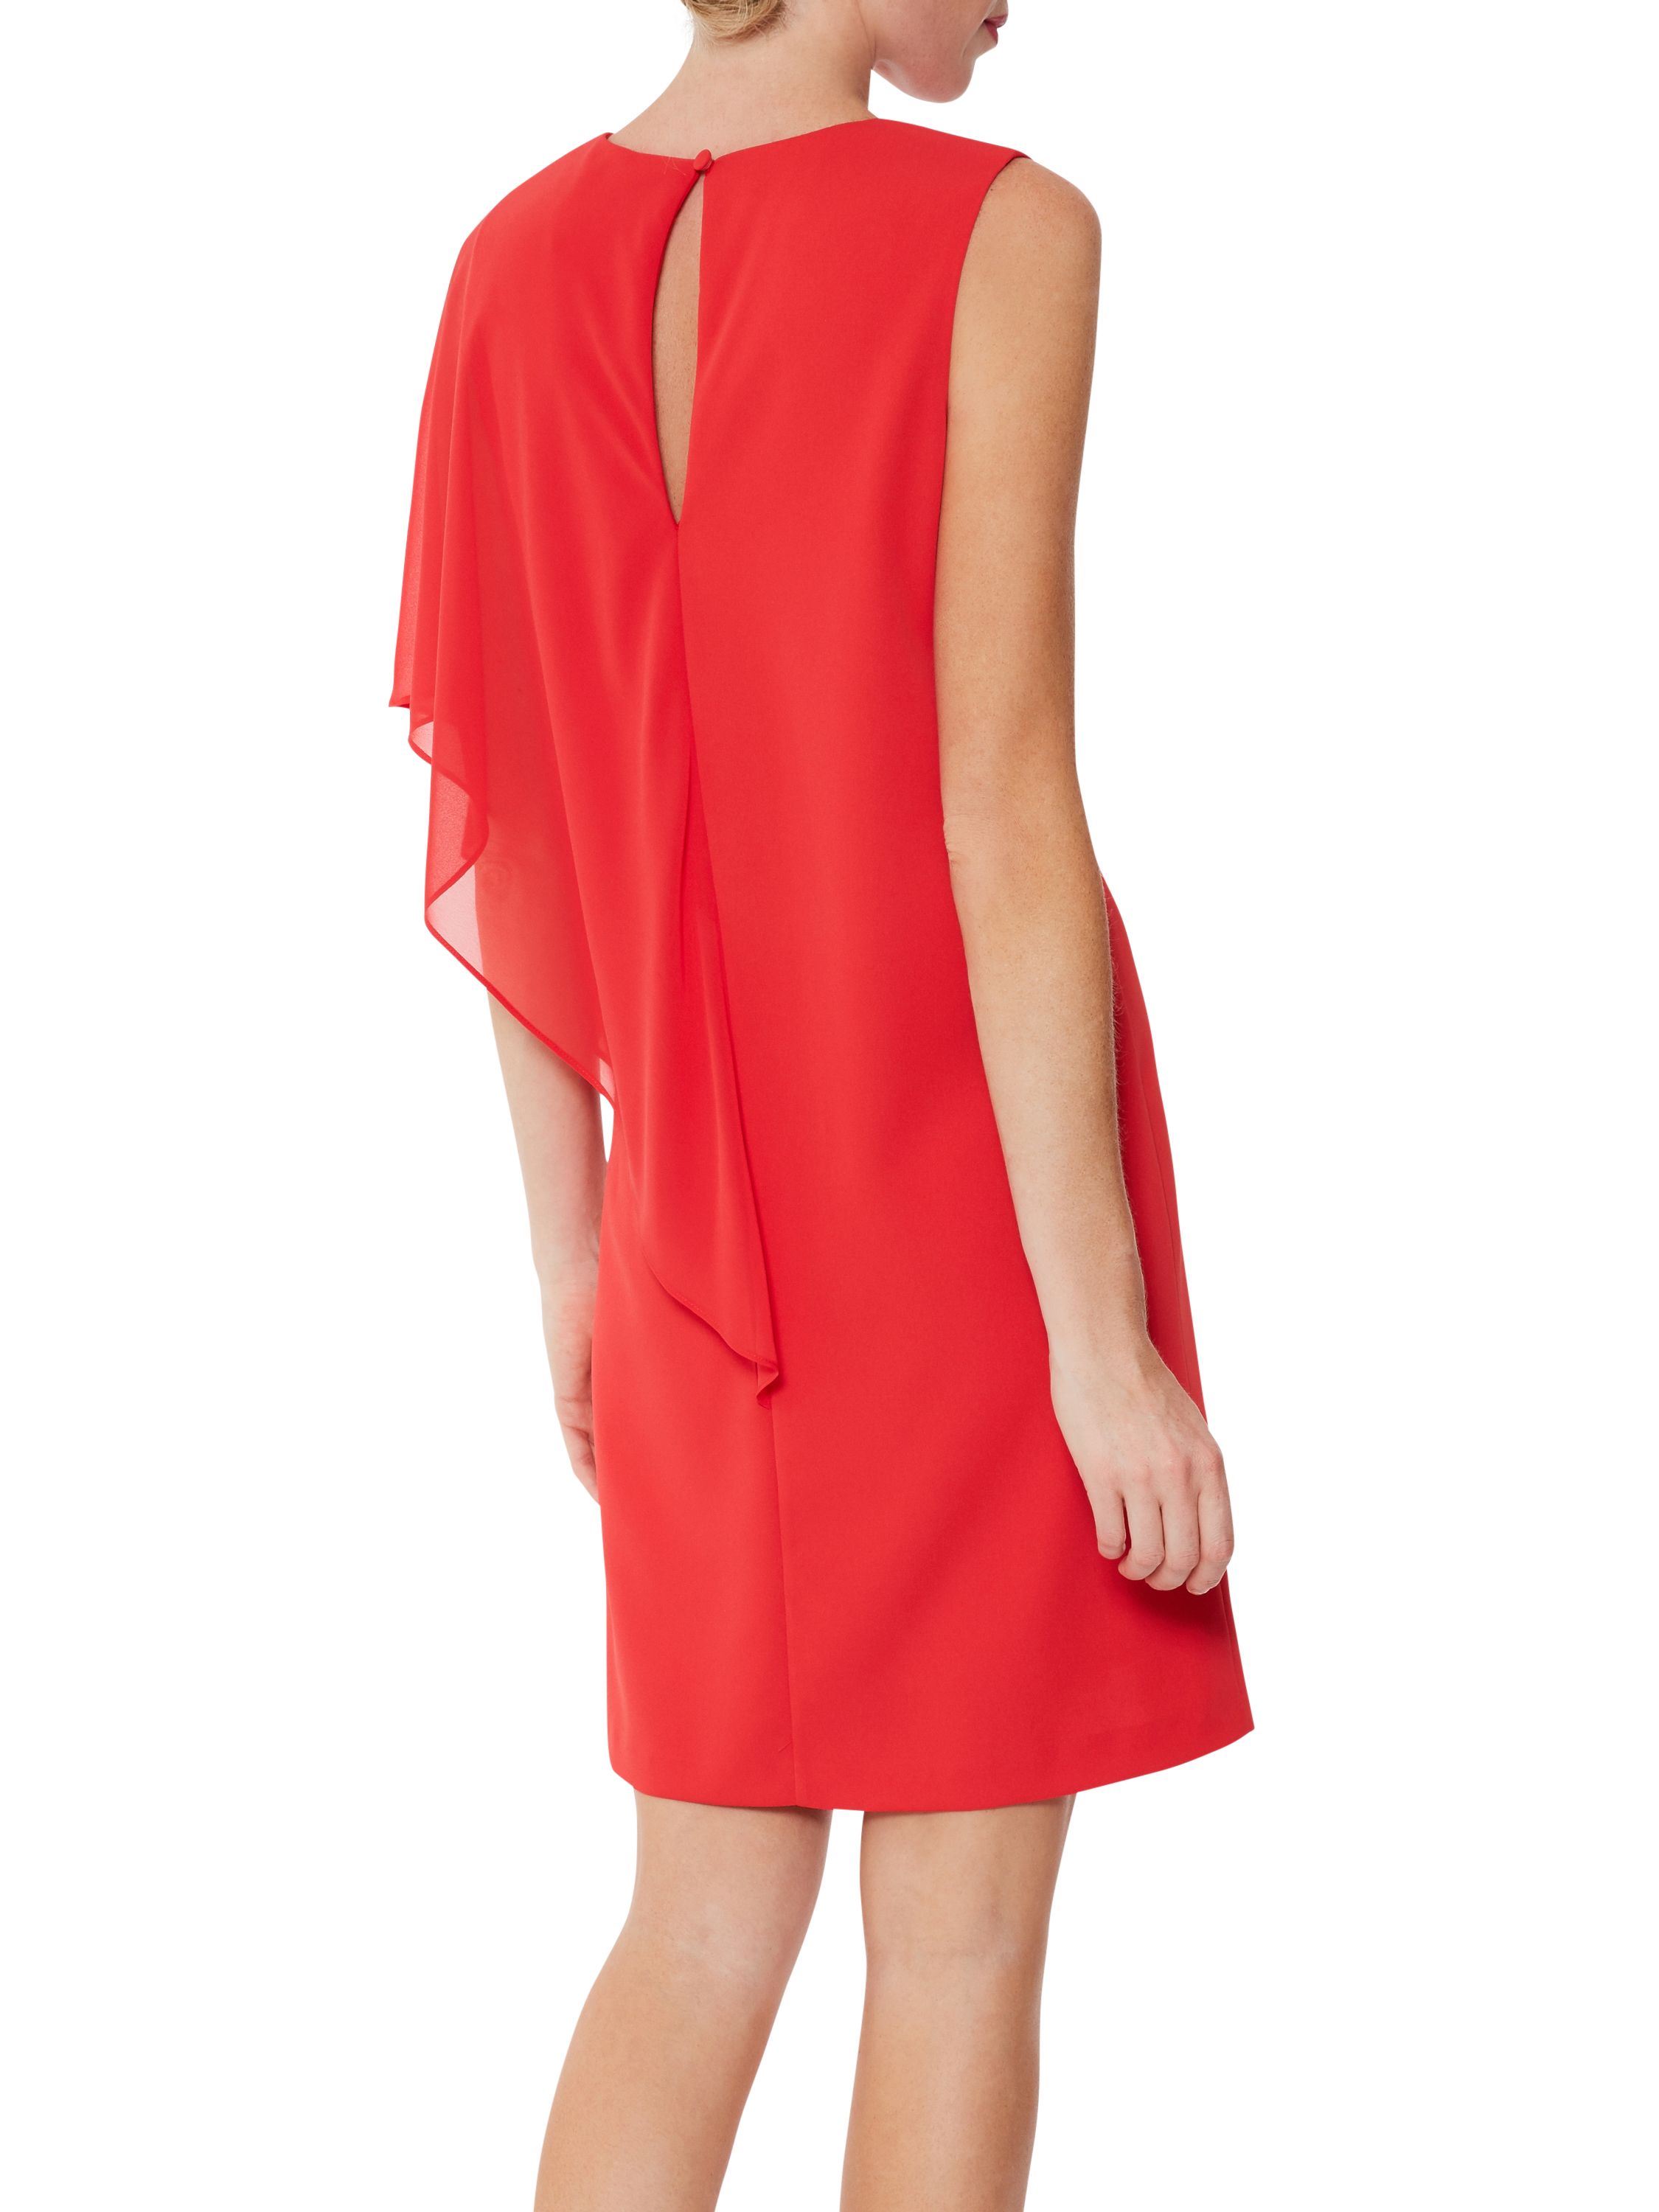 Add this Gina Bacconi chiffon dress to your party wear wardrobe this season. A simple yet classic shift dress has attached asymmetric cape that falls beautifully over the bodice to create an elegant silhouette. Perfect for a party or special ocasion. Fully lined, this dress fastens using a concealed back zip.